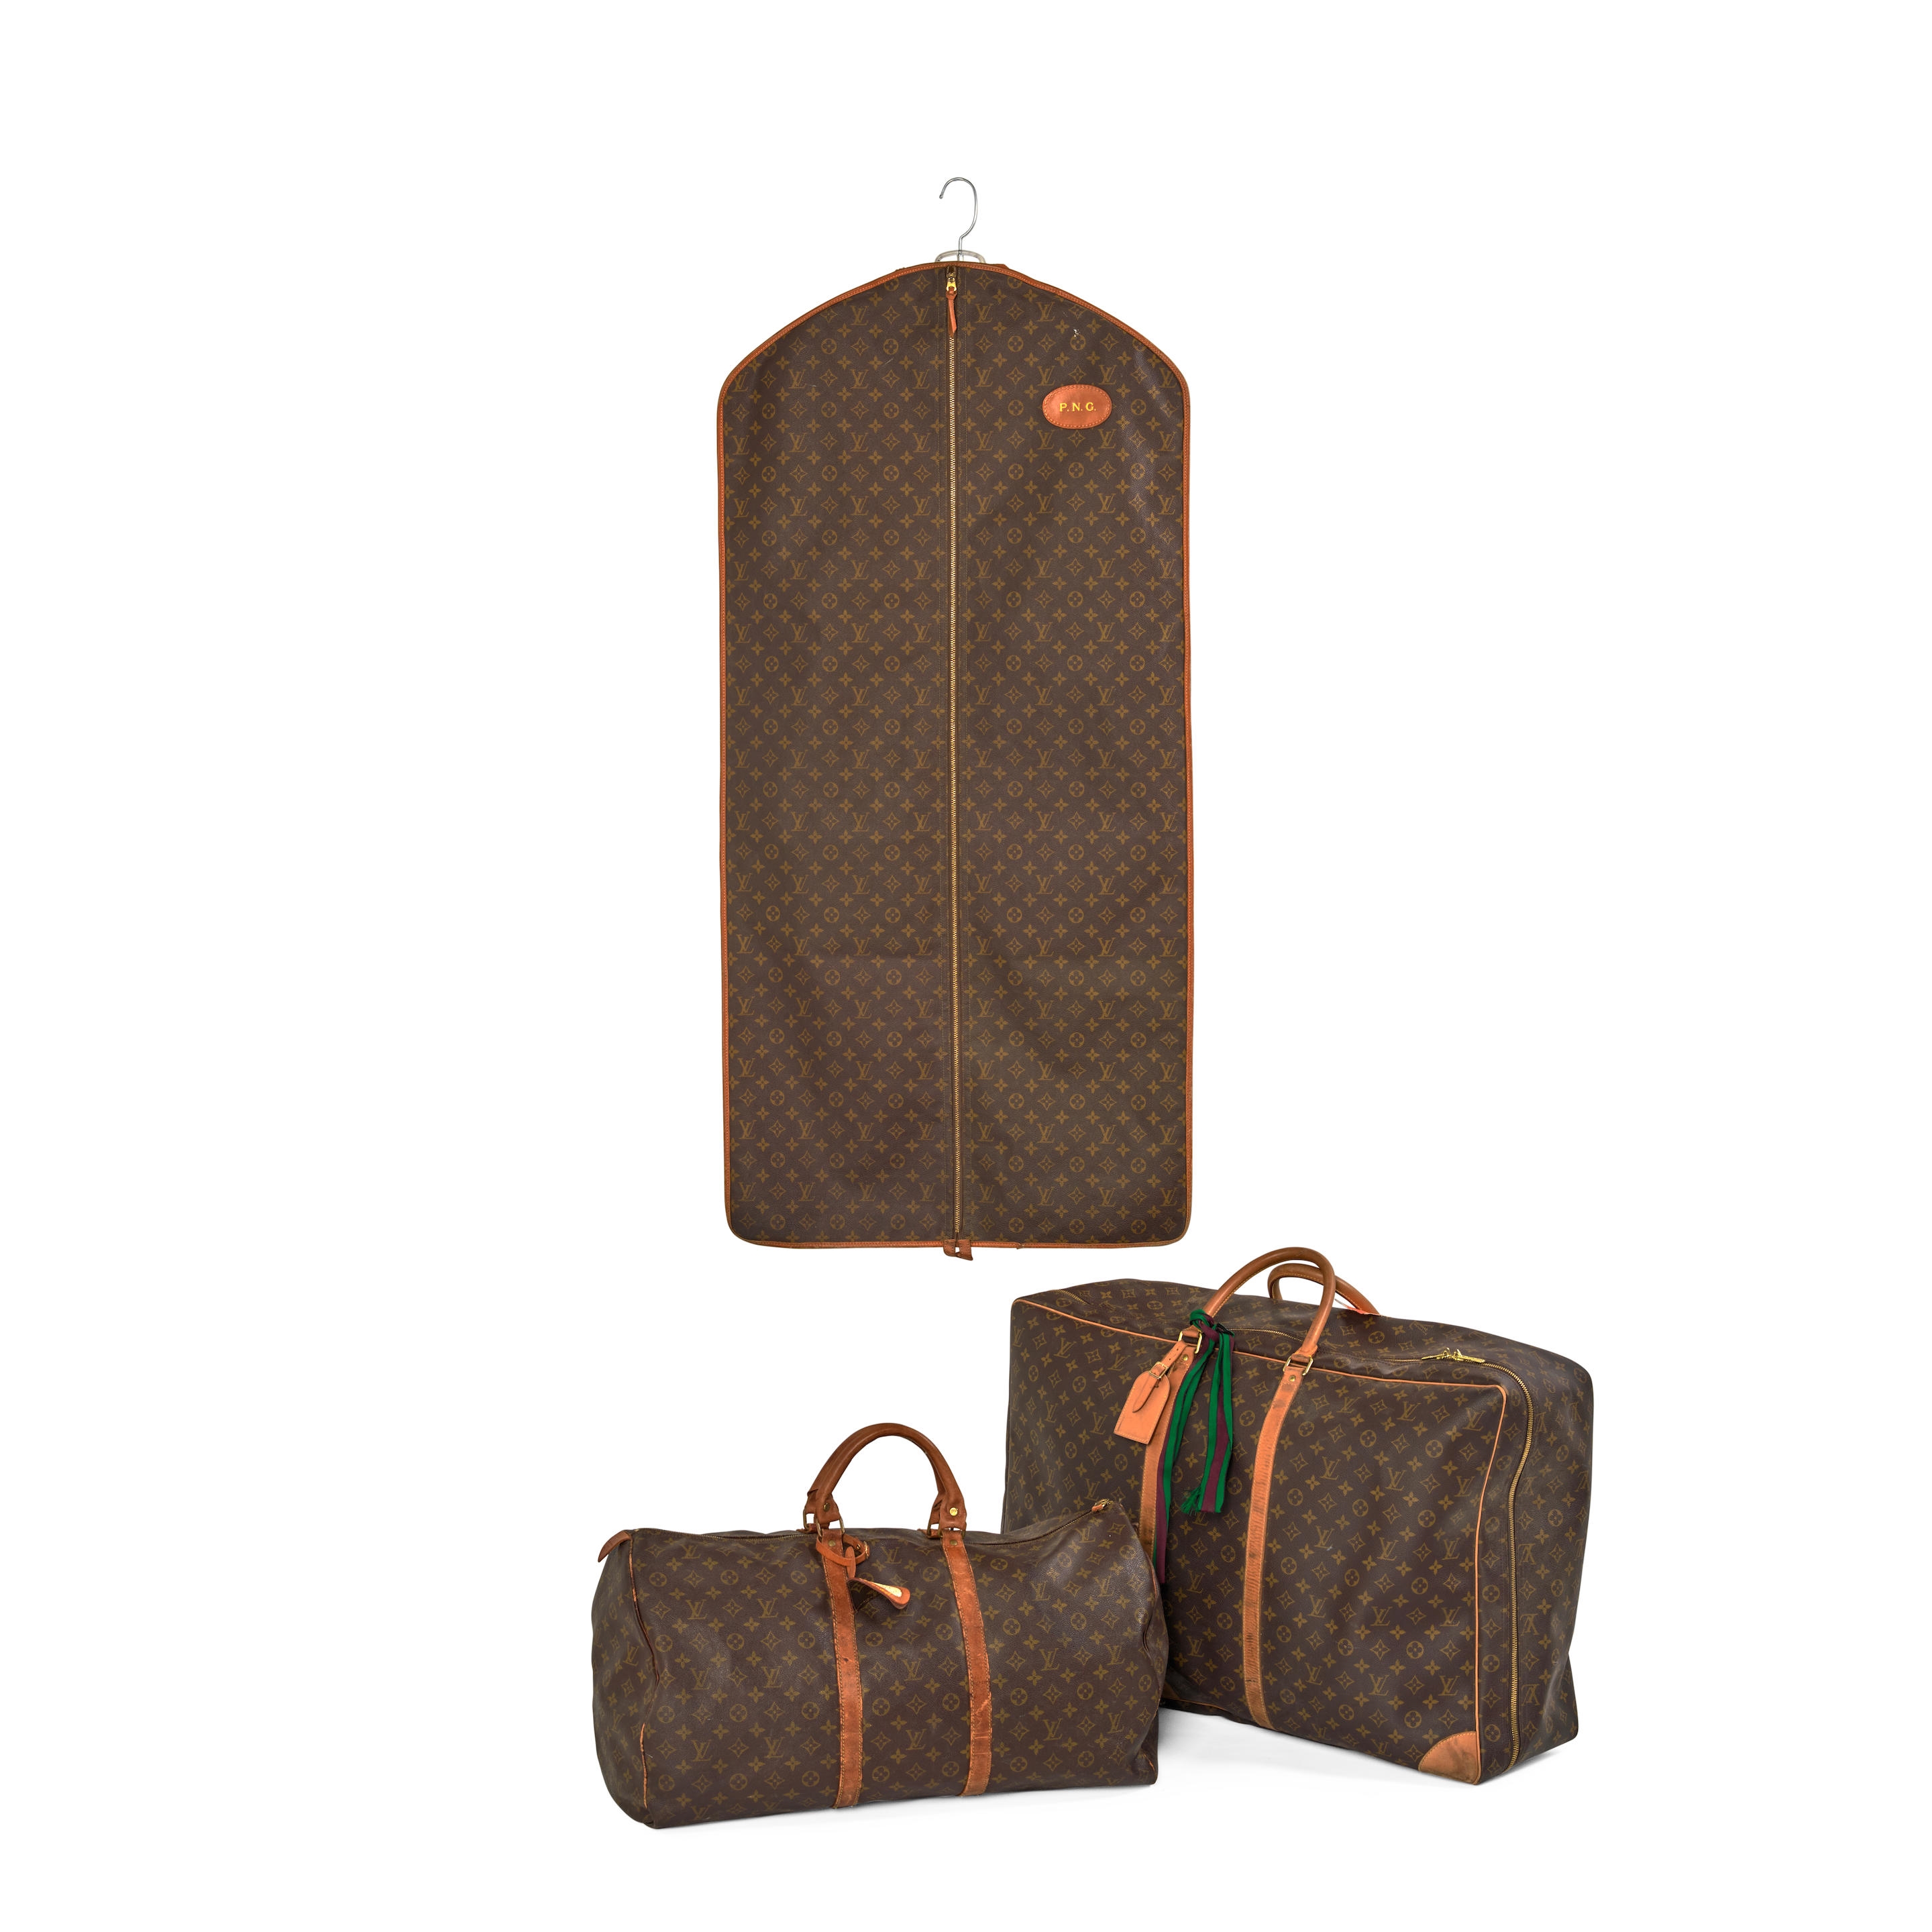 Sold at Auction: Louis Vuitton, Travel set comprinsing three